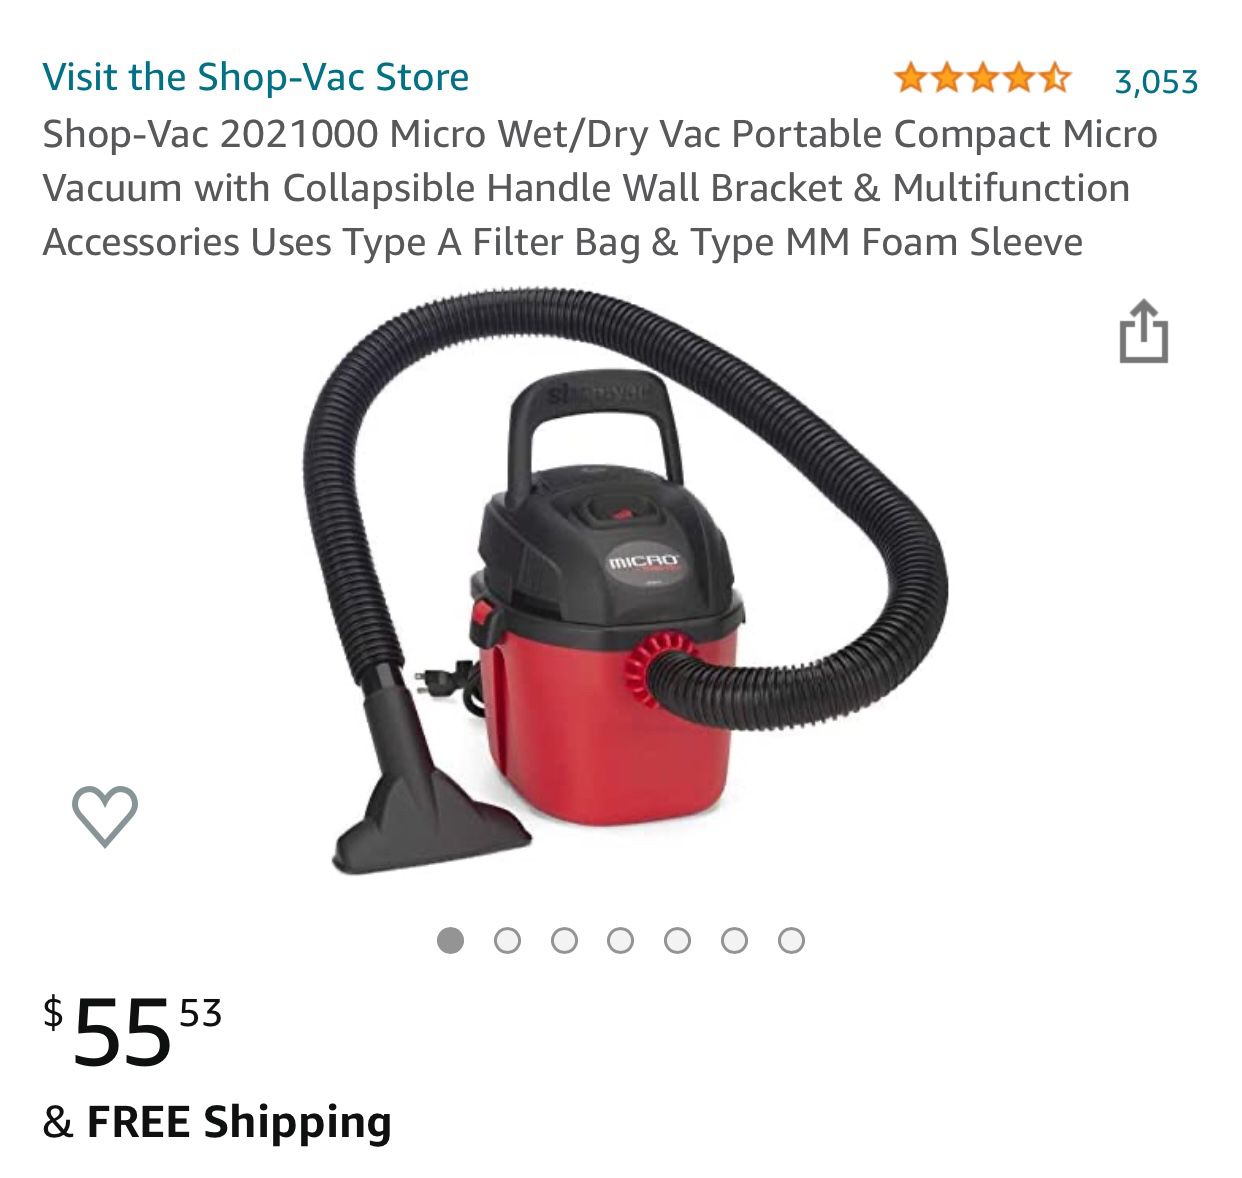 Shop-Vac 2021000 Micro Wet/Dry Vac Portable Compact Micro Vacuum with  Collapsible Handle Wall Bracket & Multifunction Accessories Uses Type A  Filter